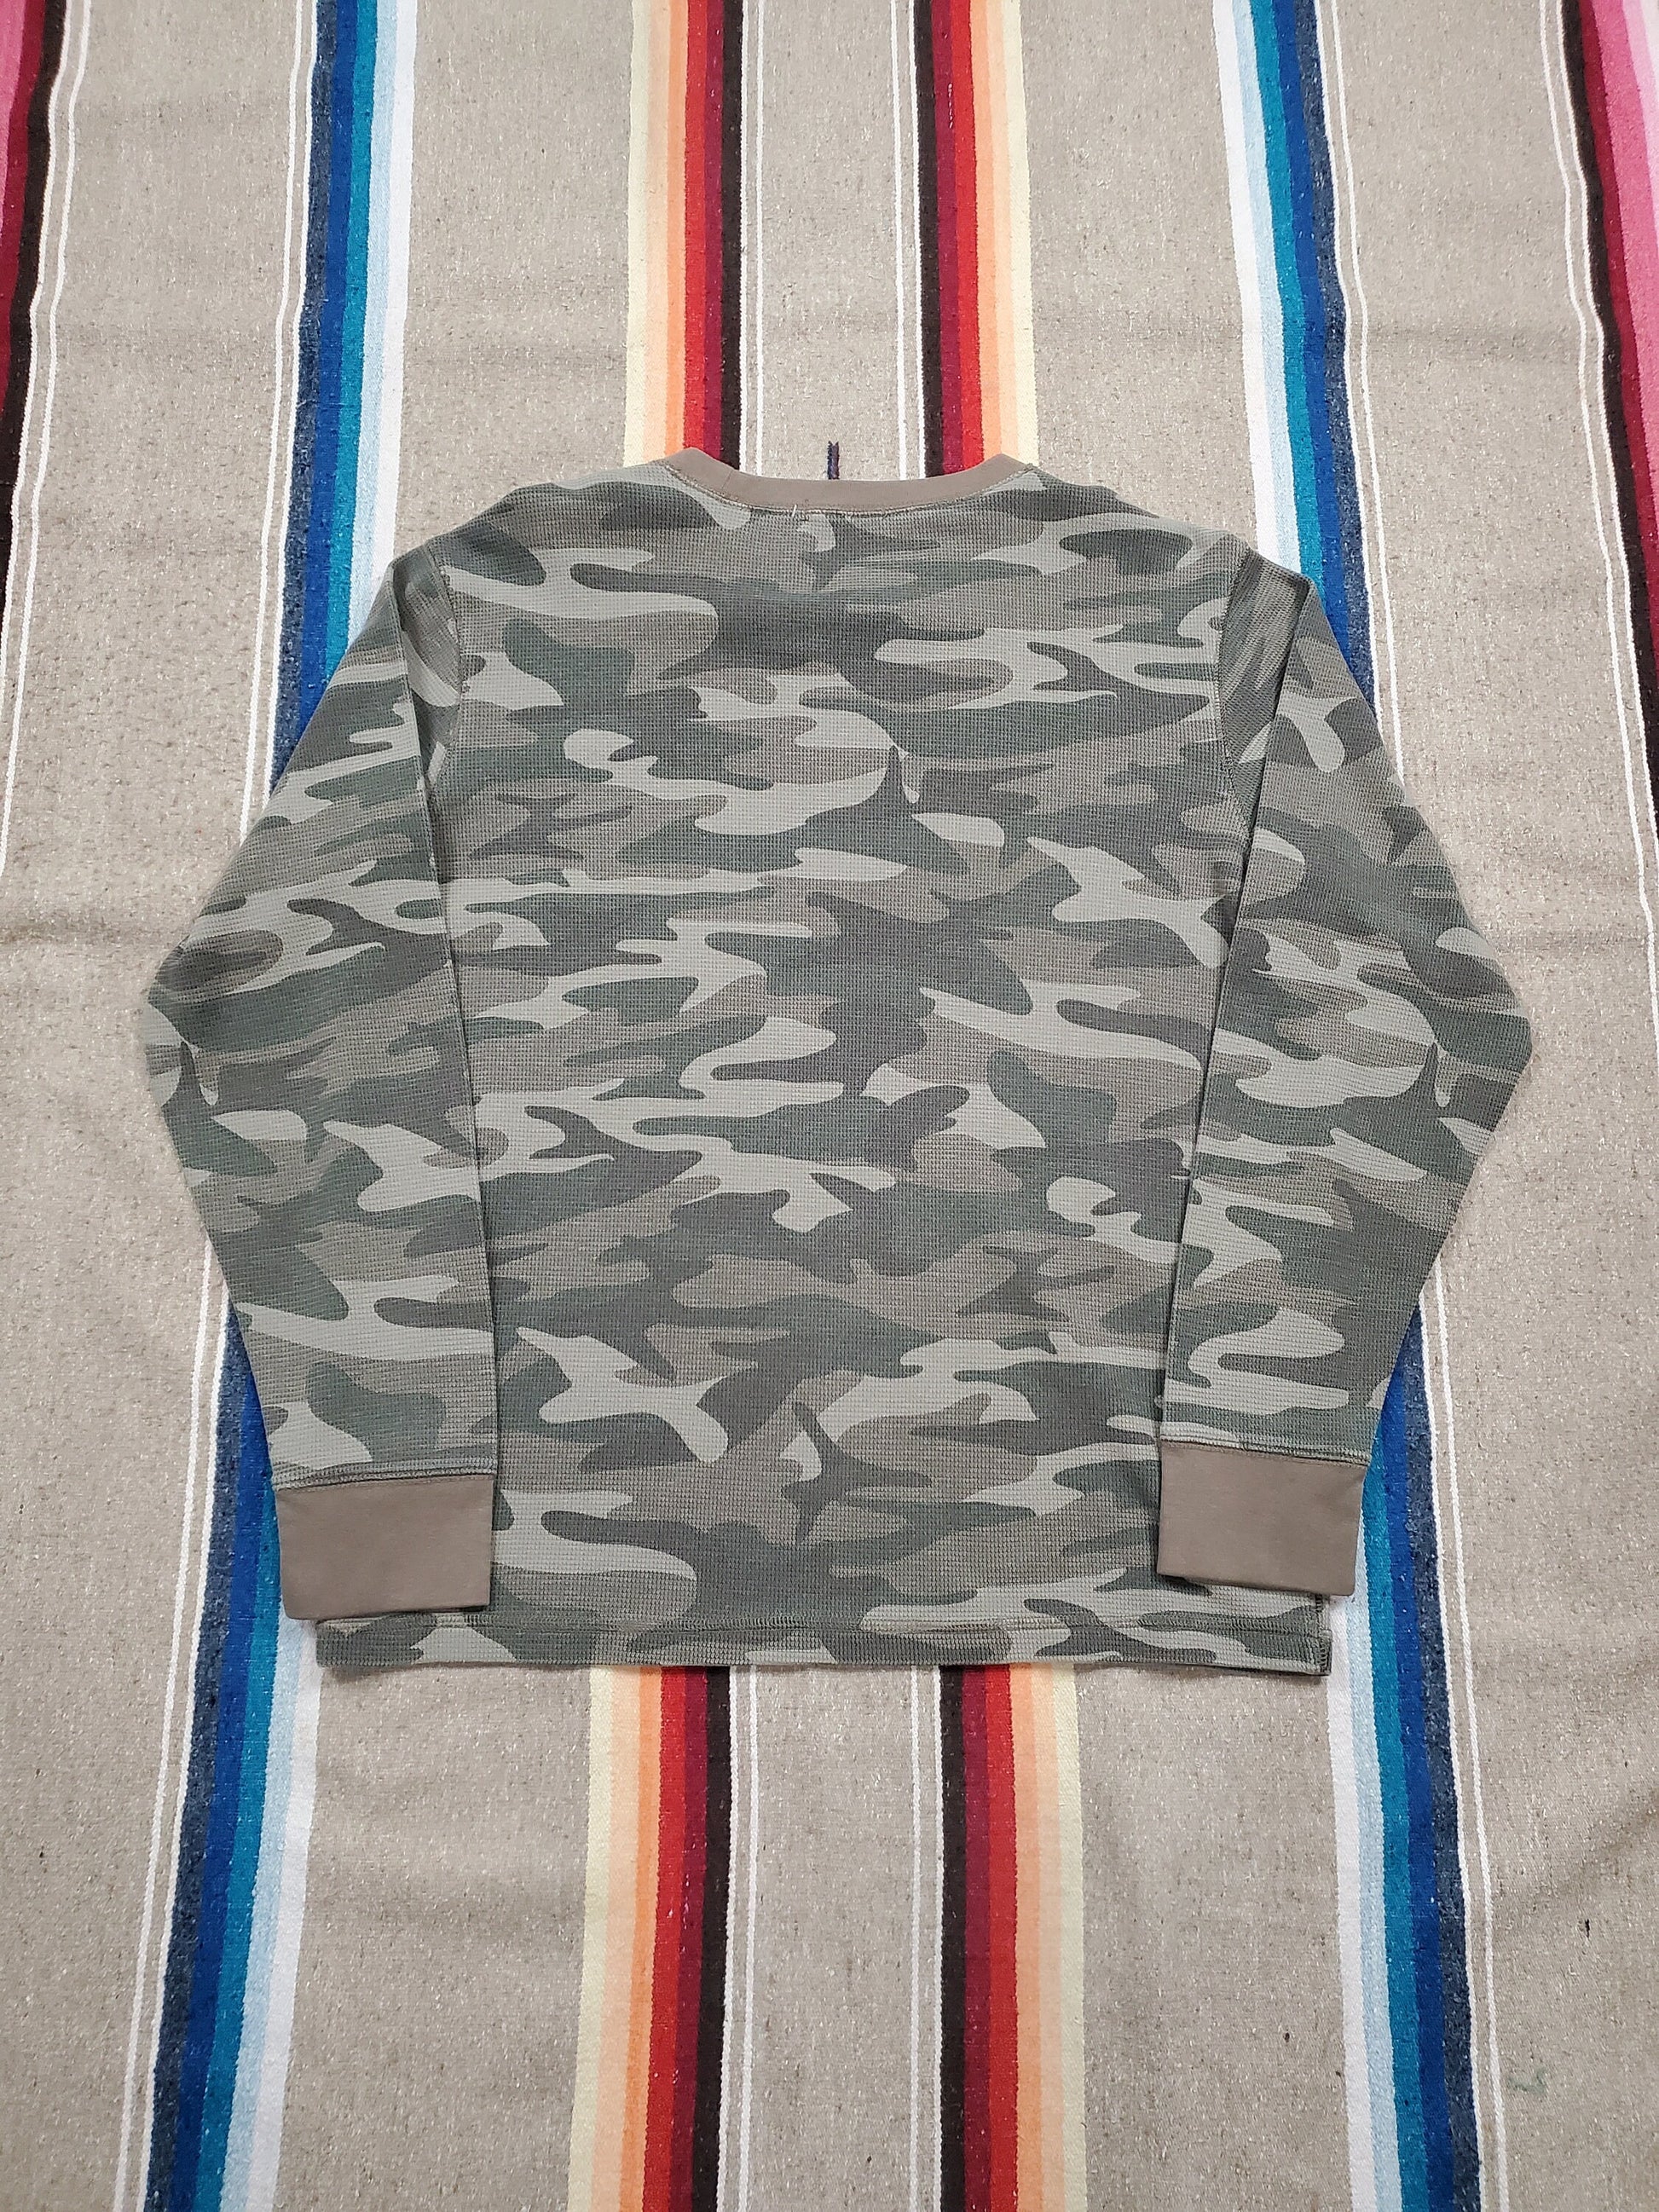 2000s/2010s Camo Thermal Longlseeve T-Shirt Size L – People's